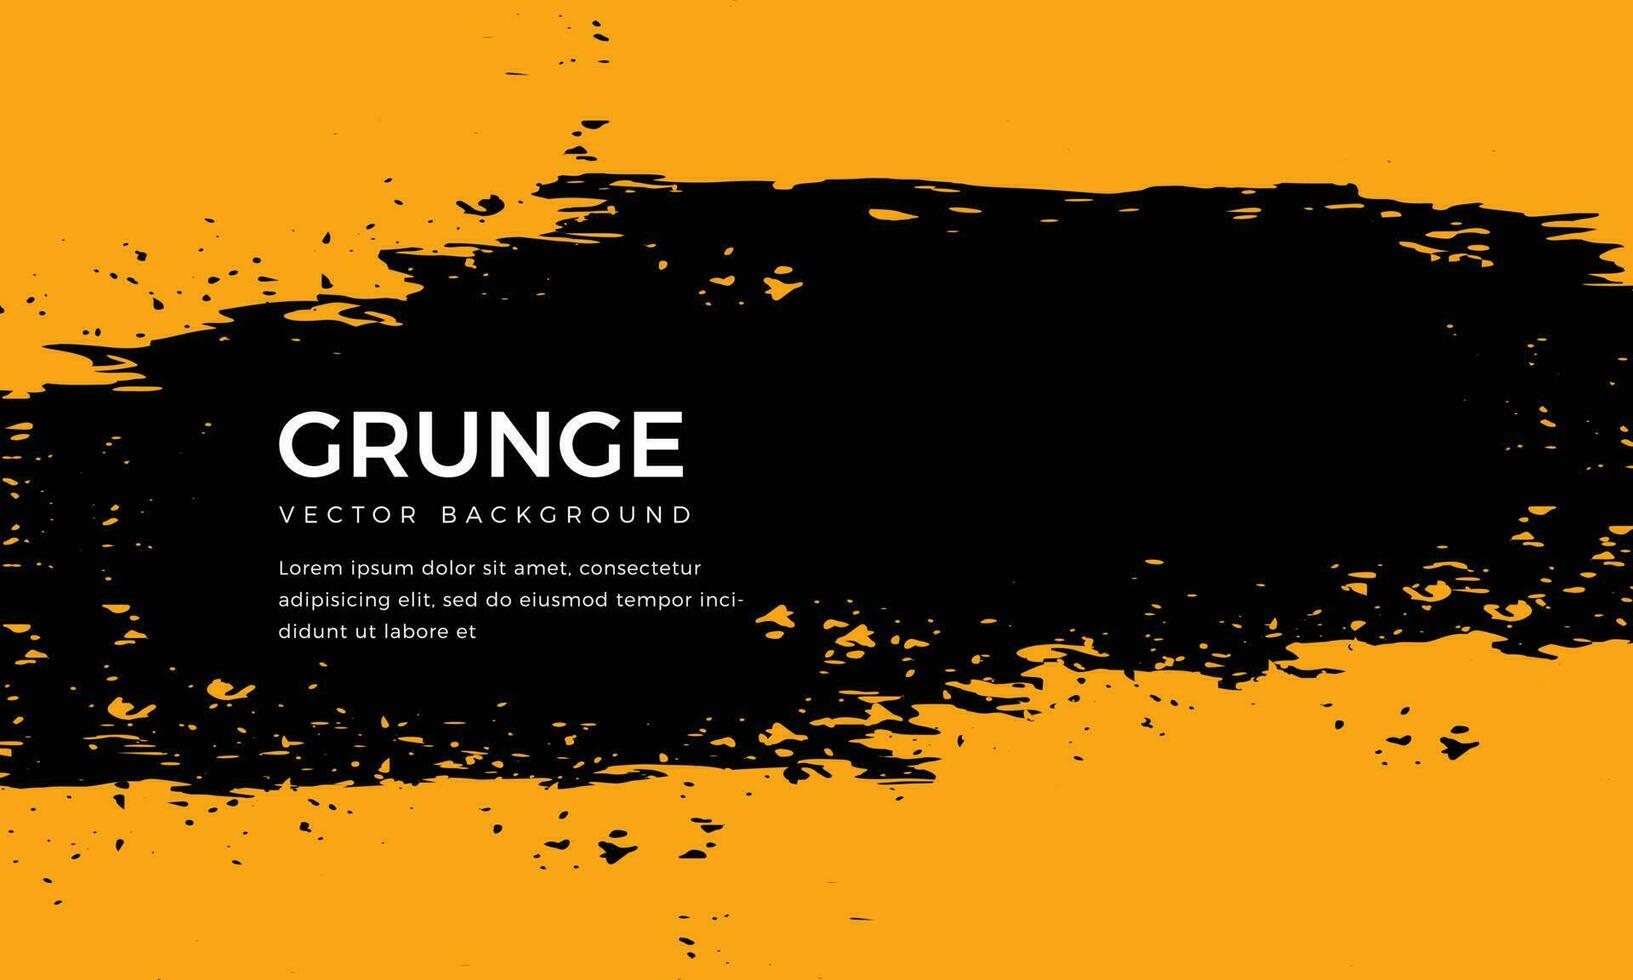 Abstract black and orange background with grunge texture. Colorful background design. Orange and black vector grunge textured background